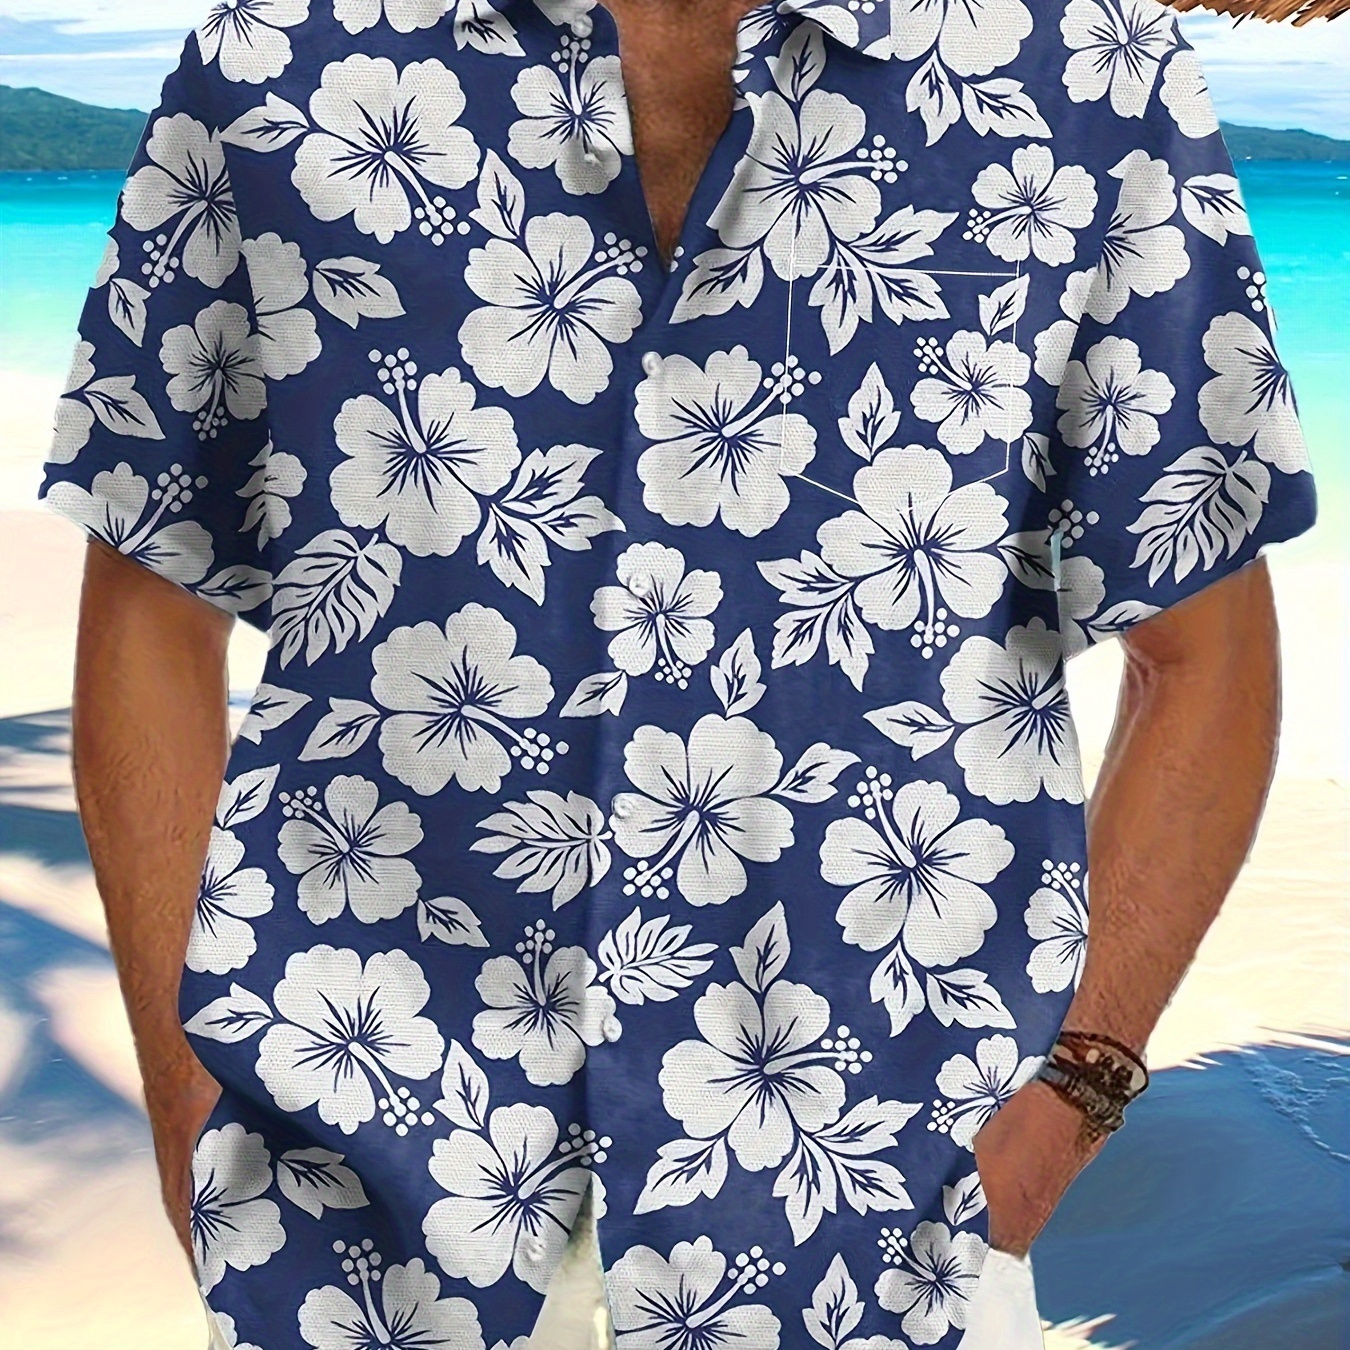 

Plus Size Men's Hawaiian Shirts For Beach, Comfy Flower Allover Printed Short Sleeve Aloha Shirts, Oversized Casual Loose Tops For Summer